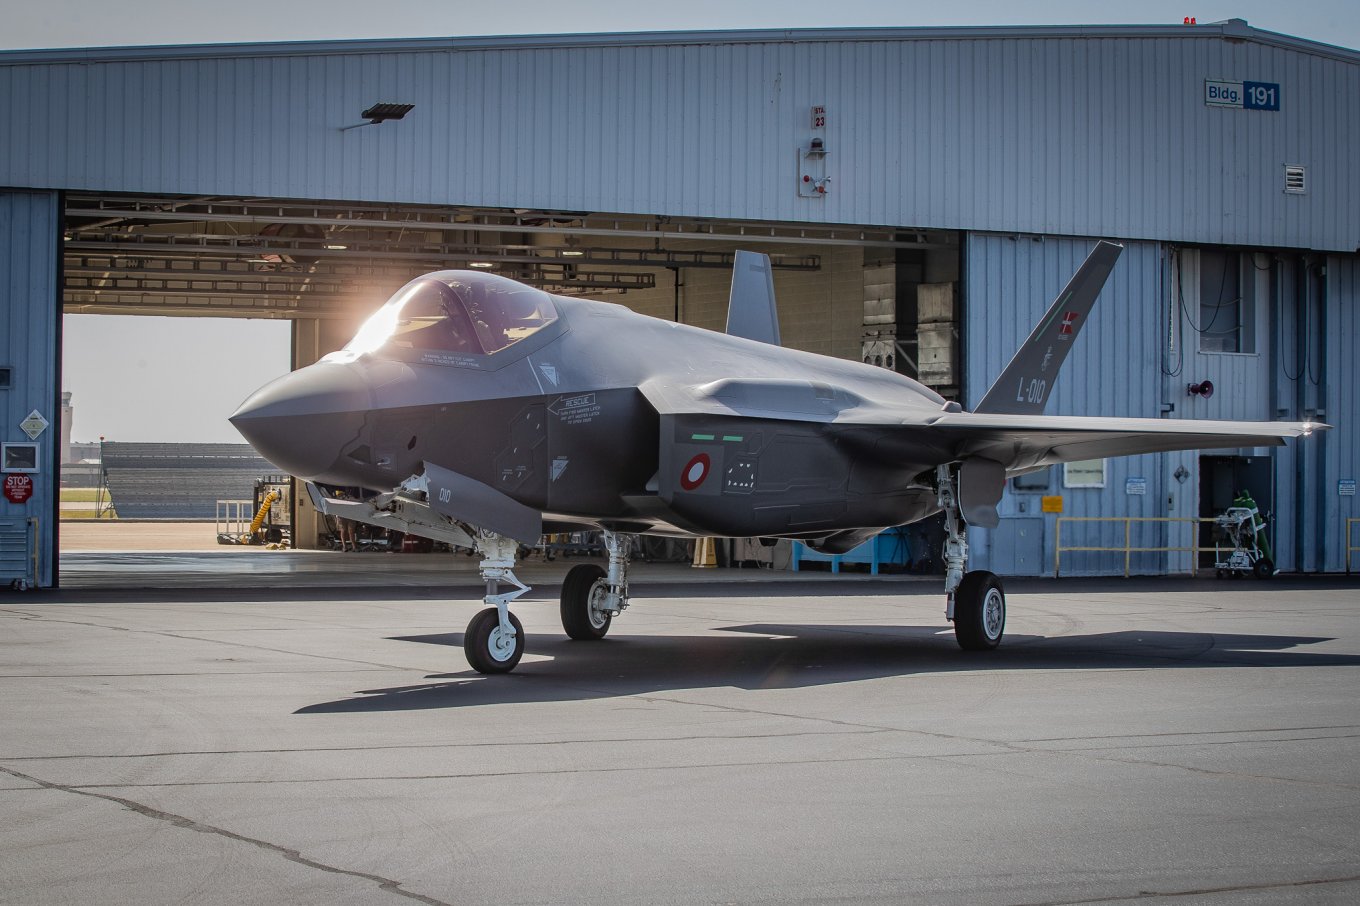 F-35 multirole 5th generation fighter in service with the Danish Air Force